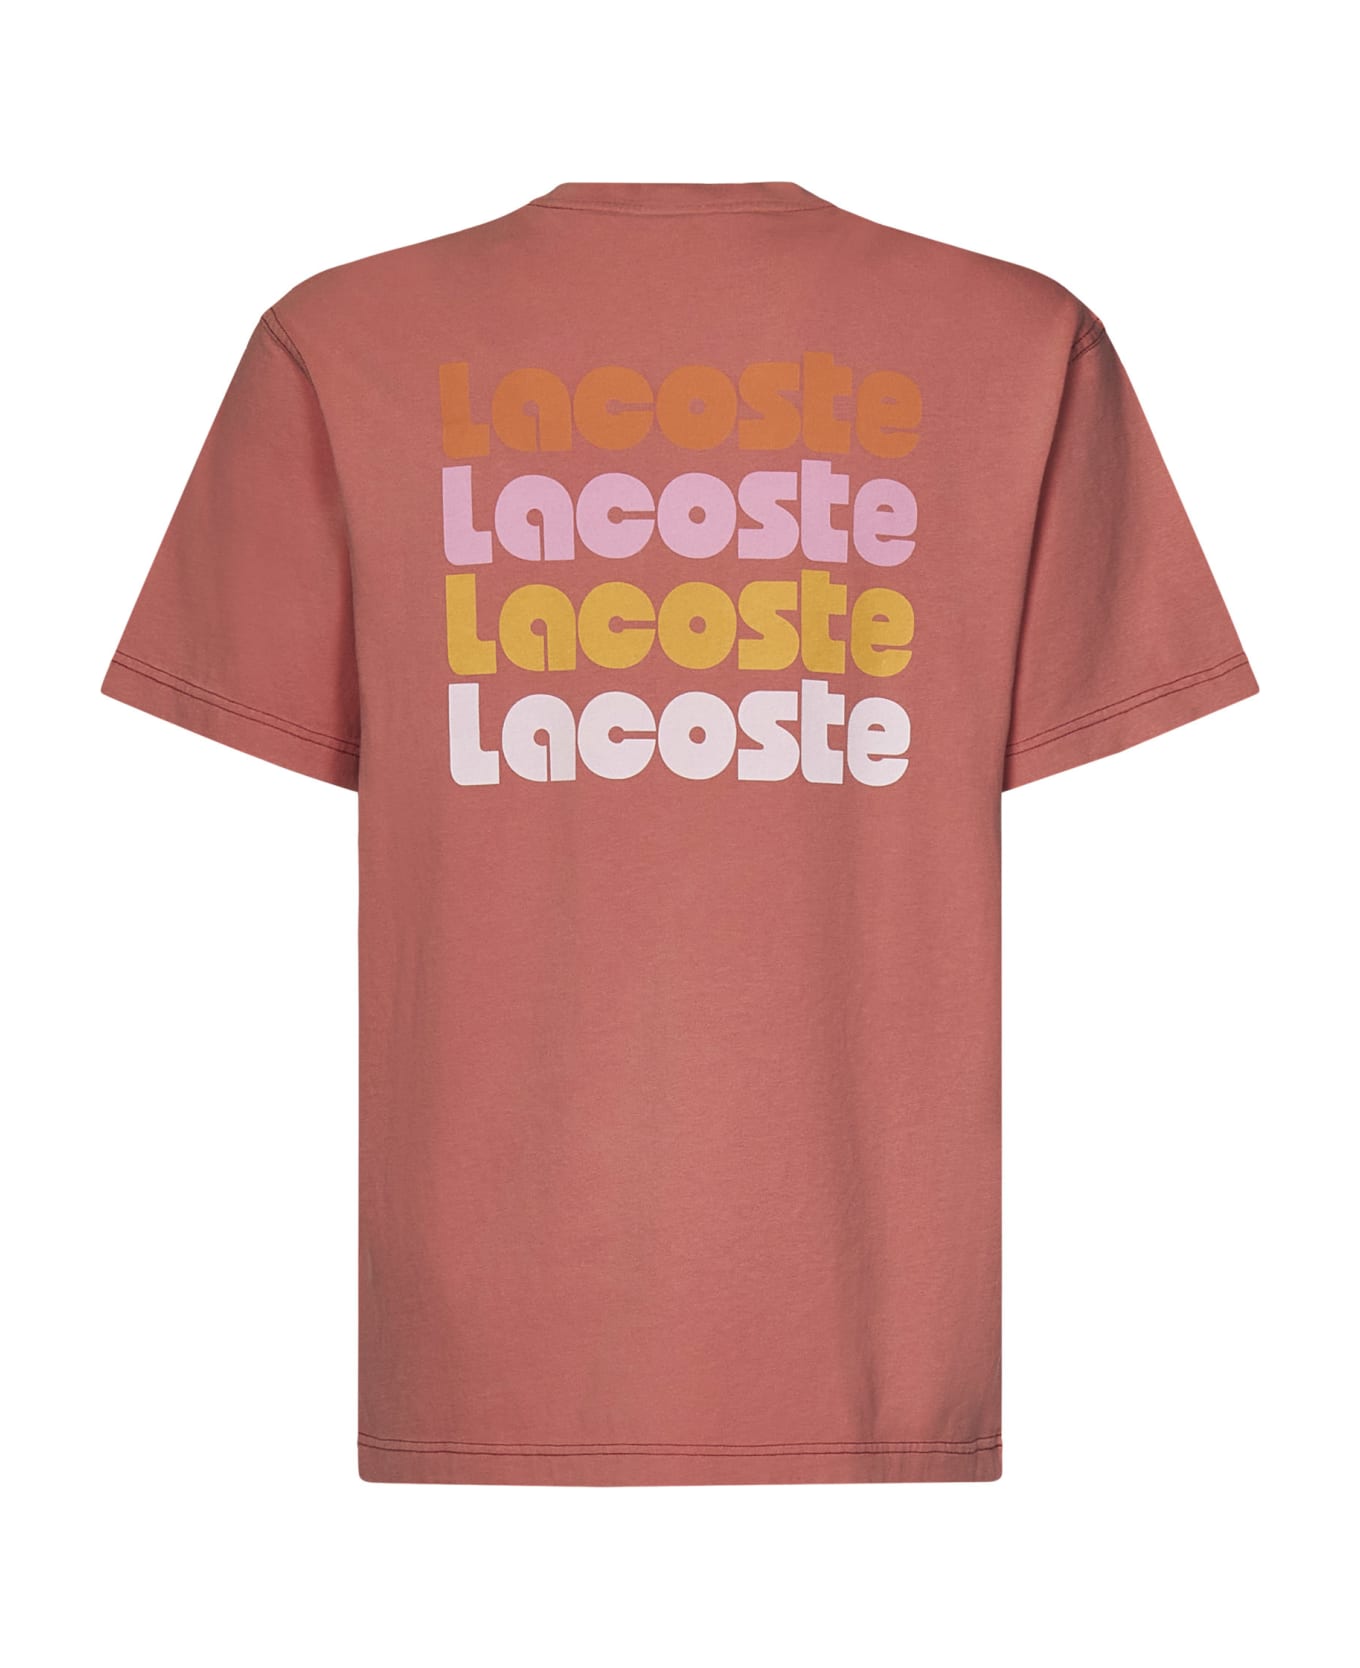 Lacoste T-shirt - Pink